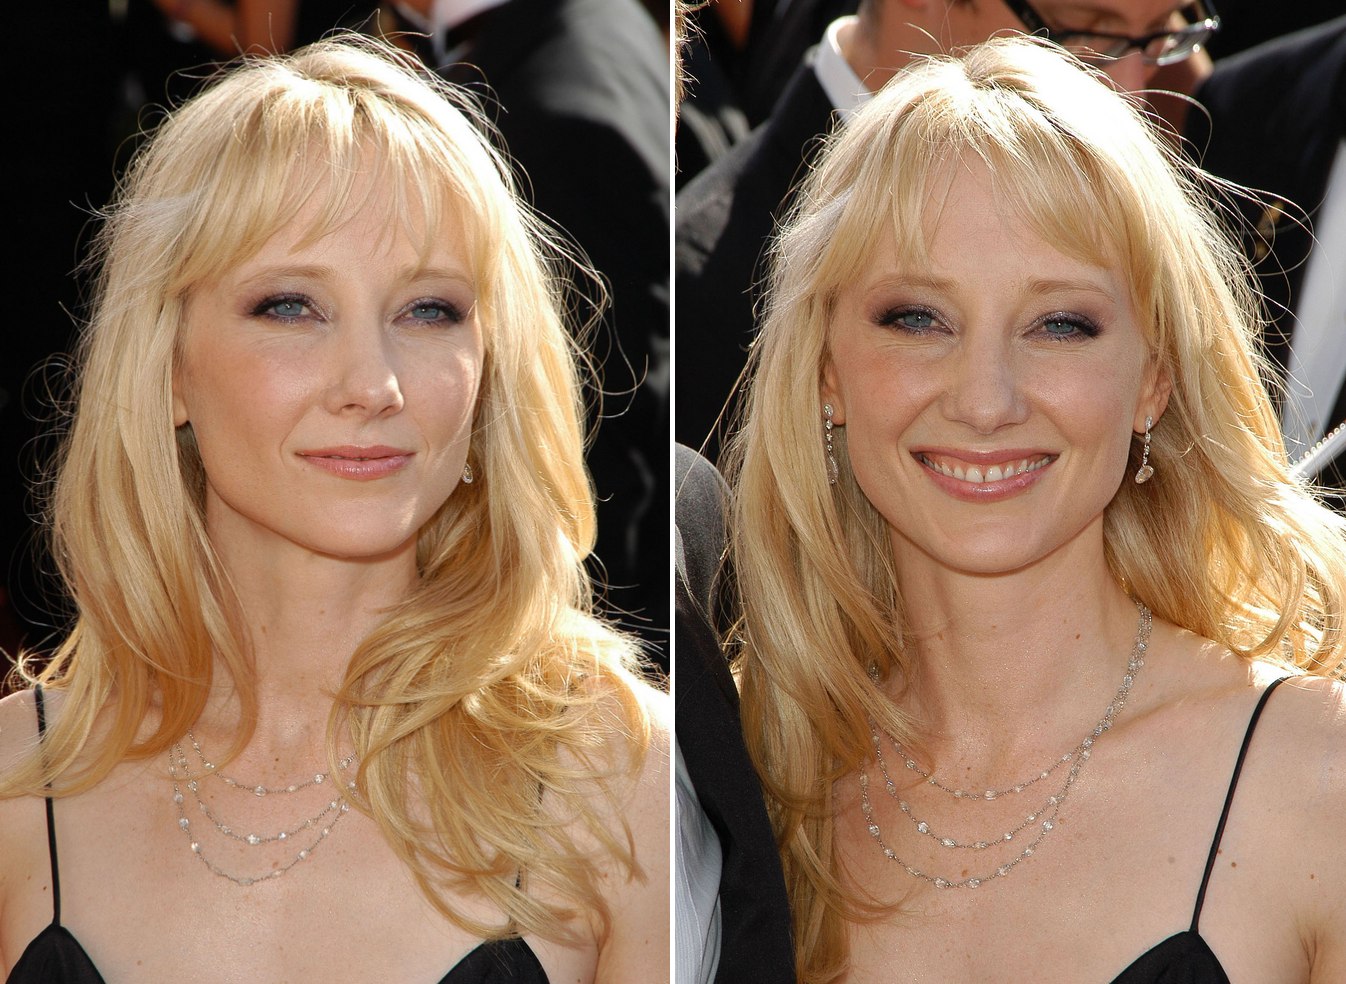 Anne Heche hairstyle | Long blonde hair instead of short